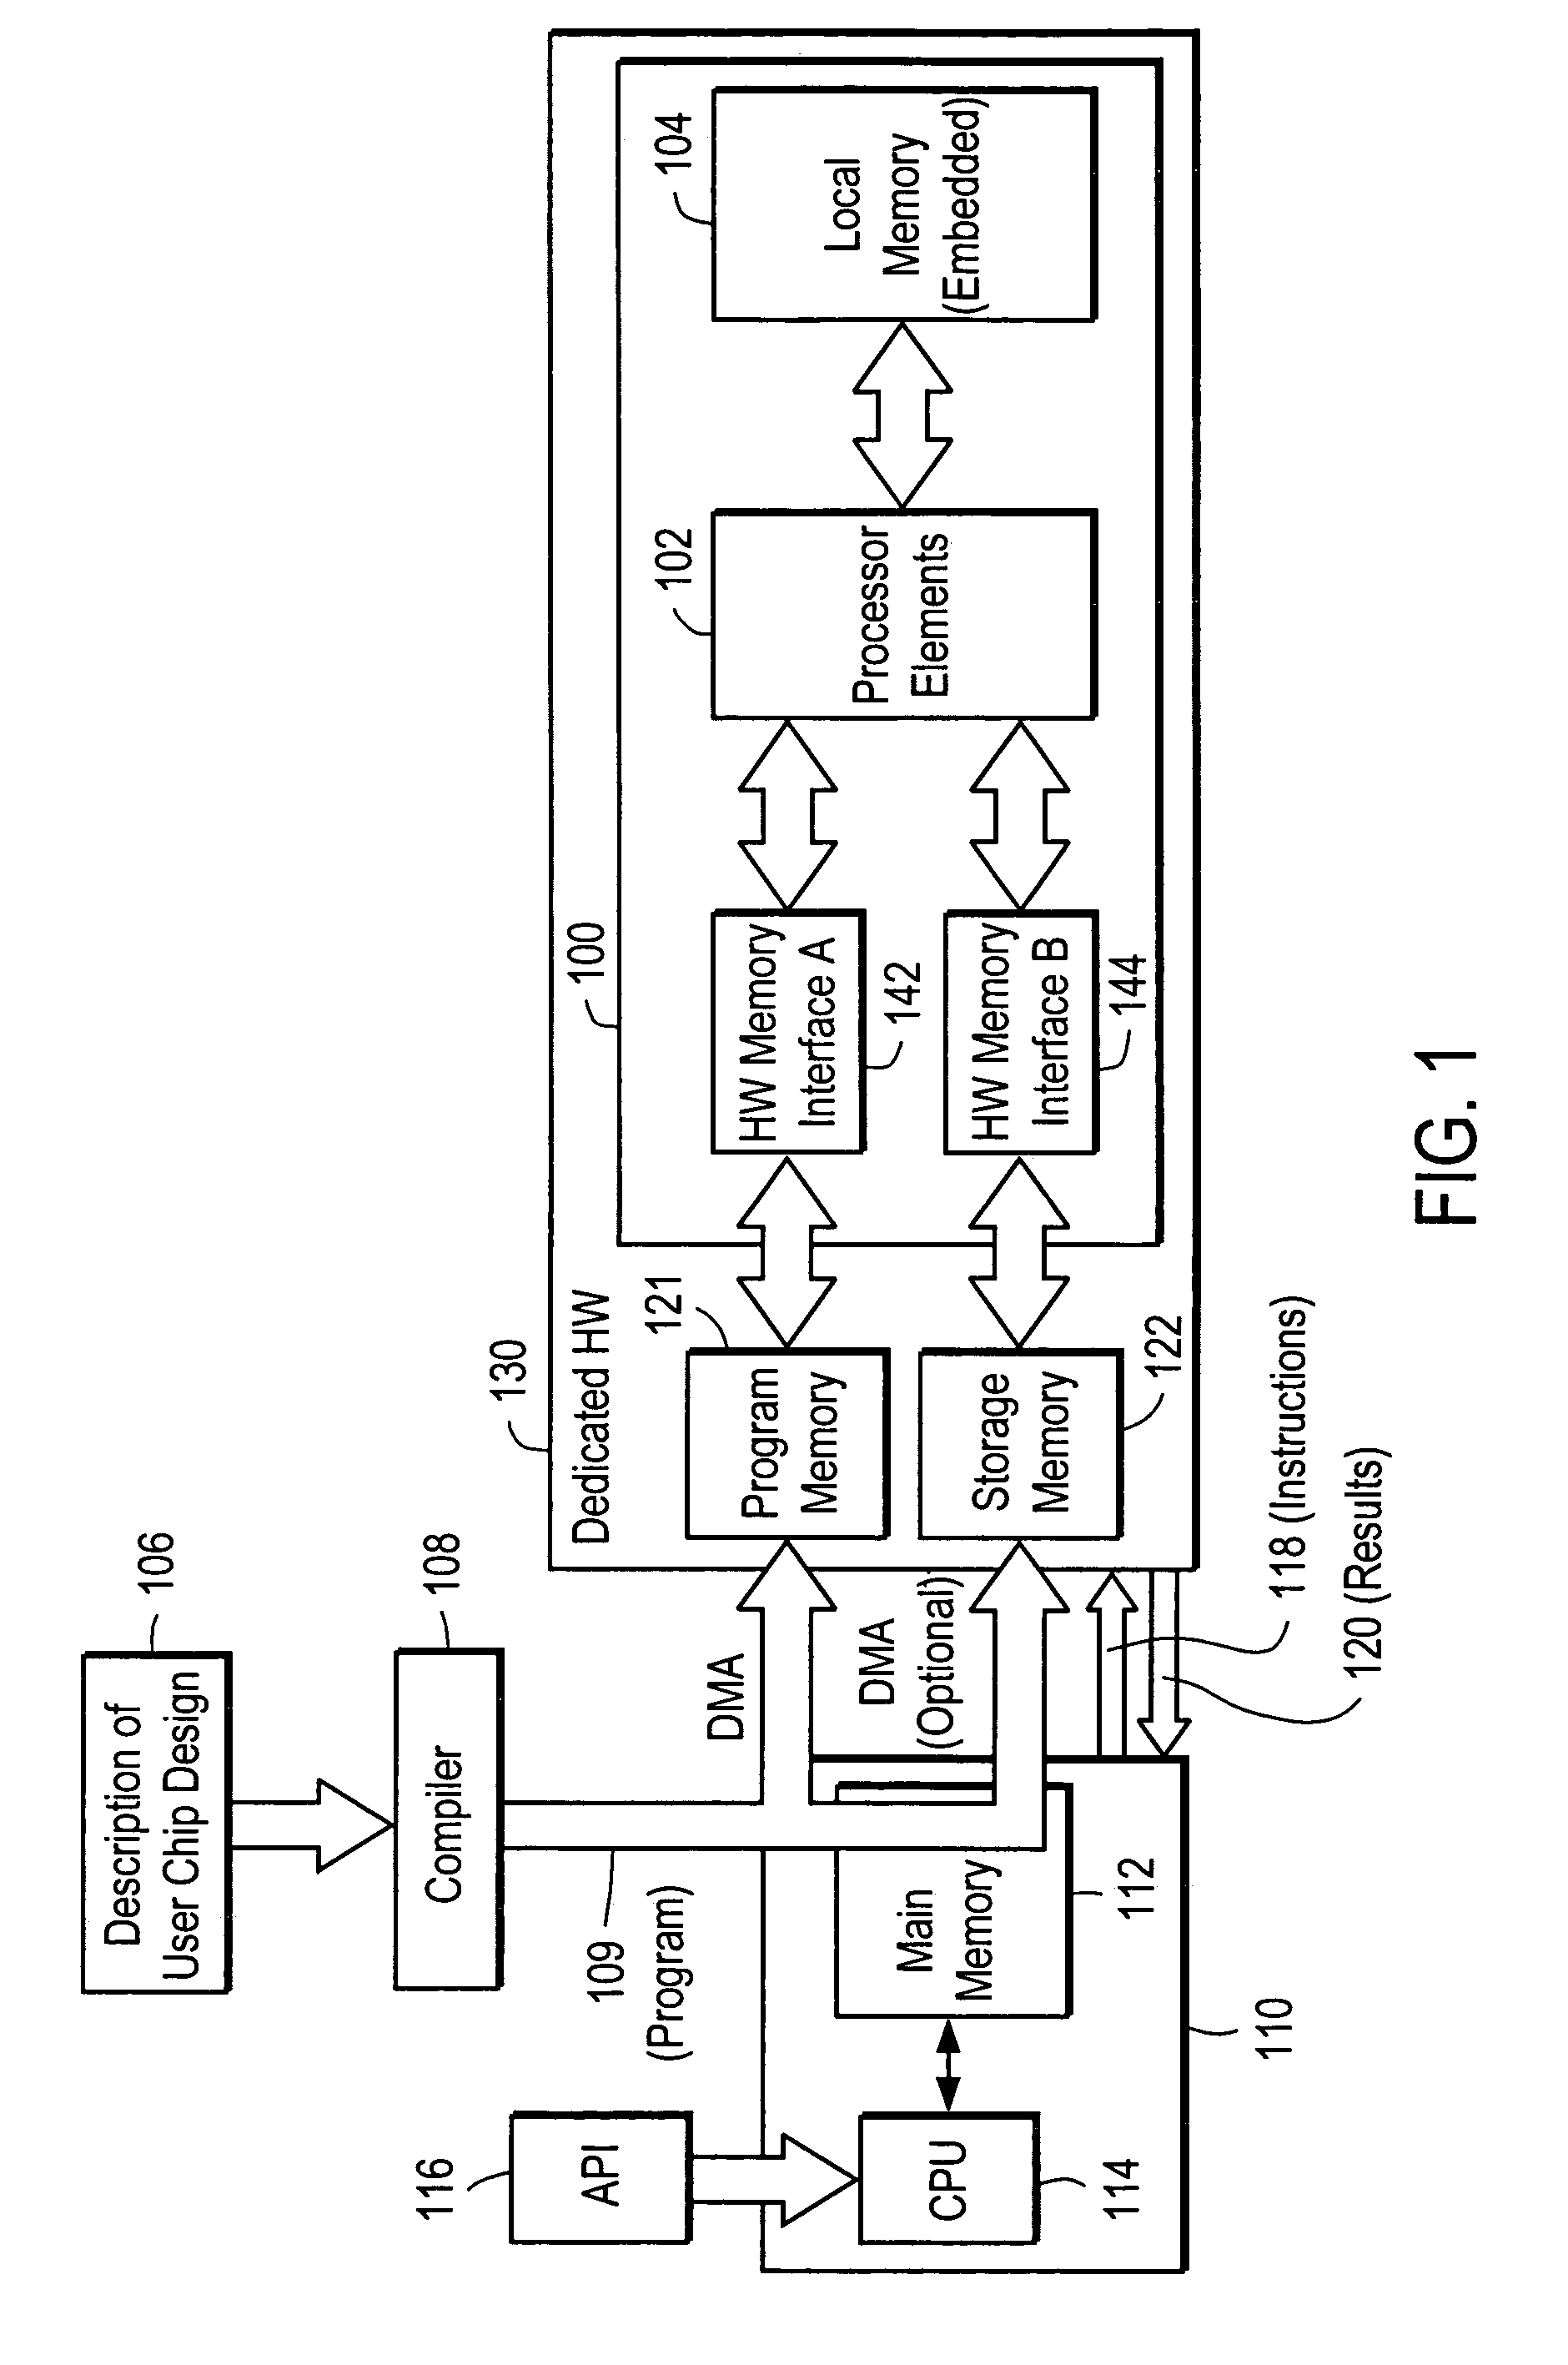 Hardware acceleration system for logic simulation using shift register as local cache